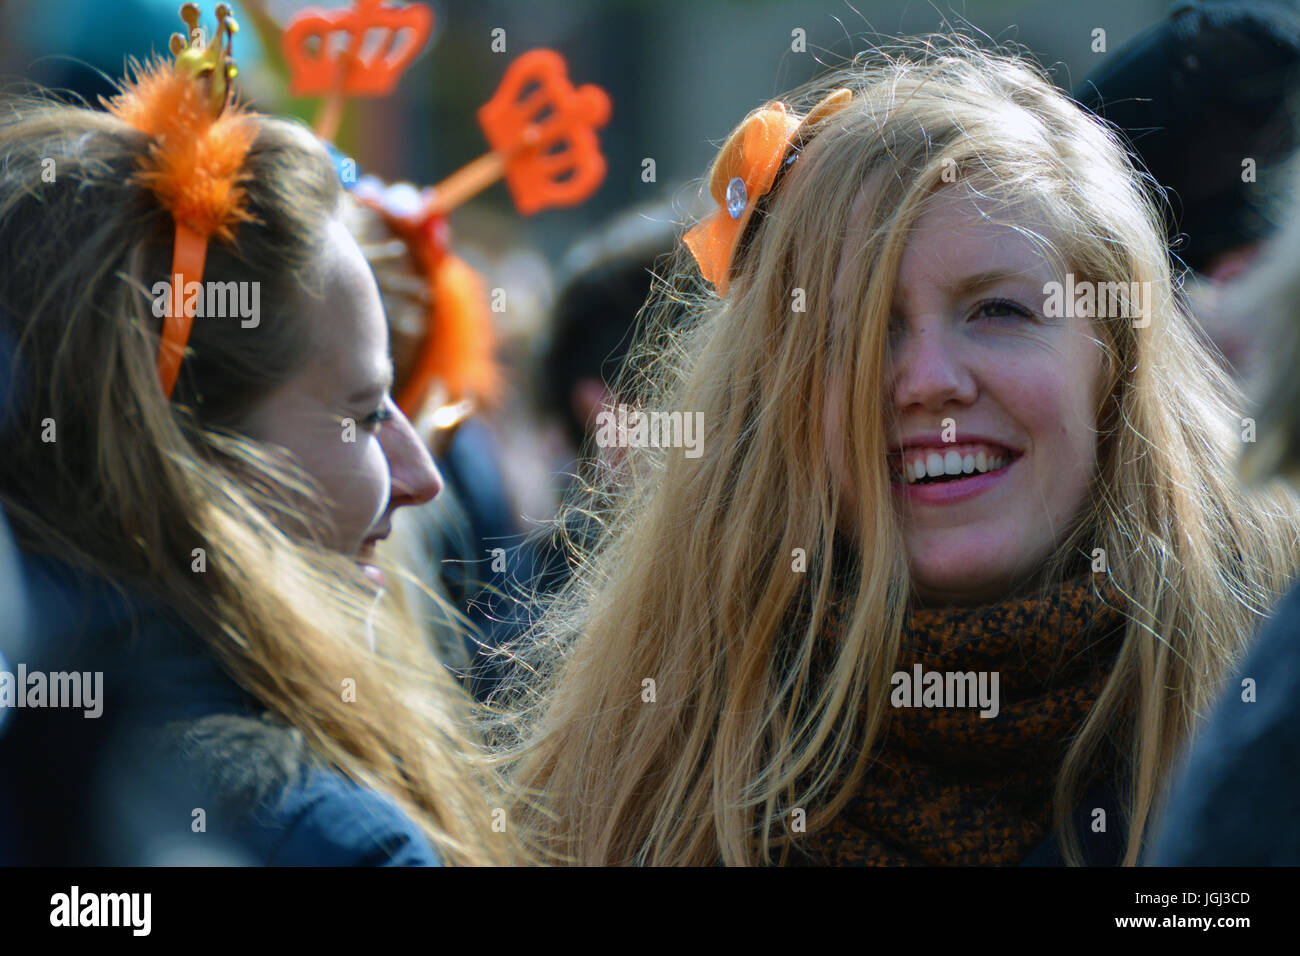 A blonde girl having fun and drinking on Kingsdad or the King's Day in Groningen, Netherlands. Stock Photo